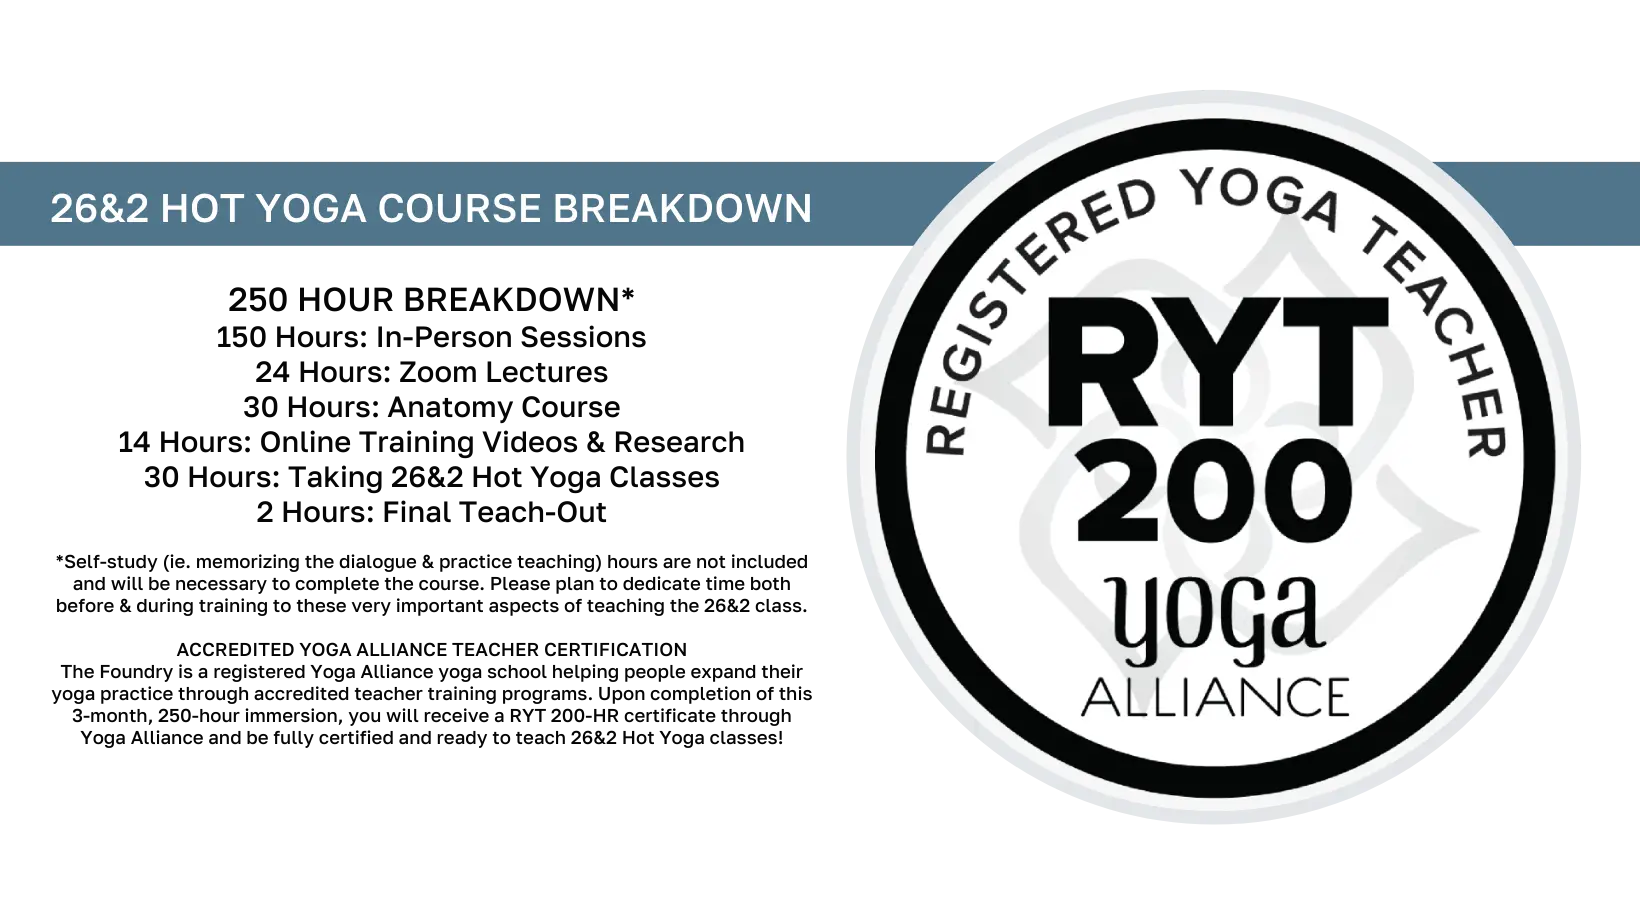 hot yoga certification - What degree is hot yoga